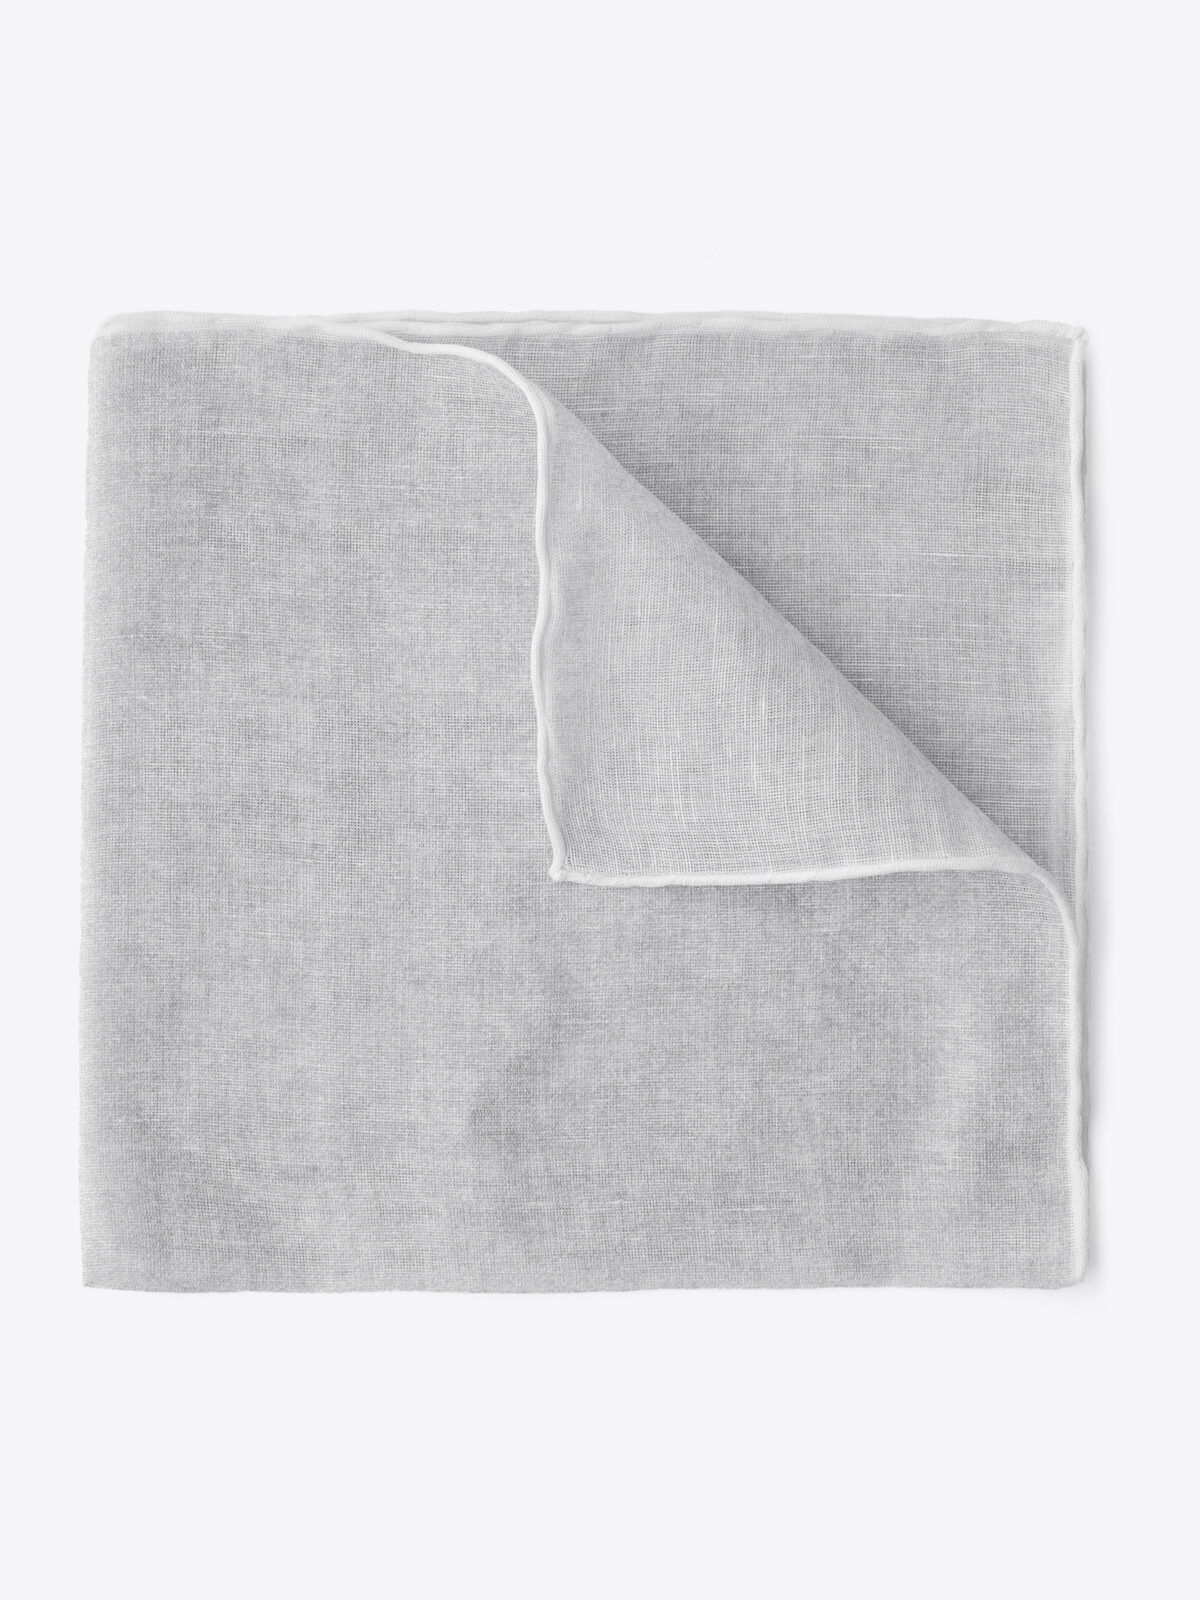 White Tipped Light Grey Cotton and Linen Pocket Square